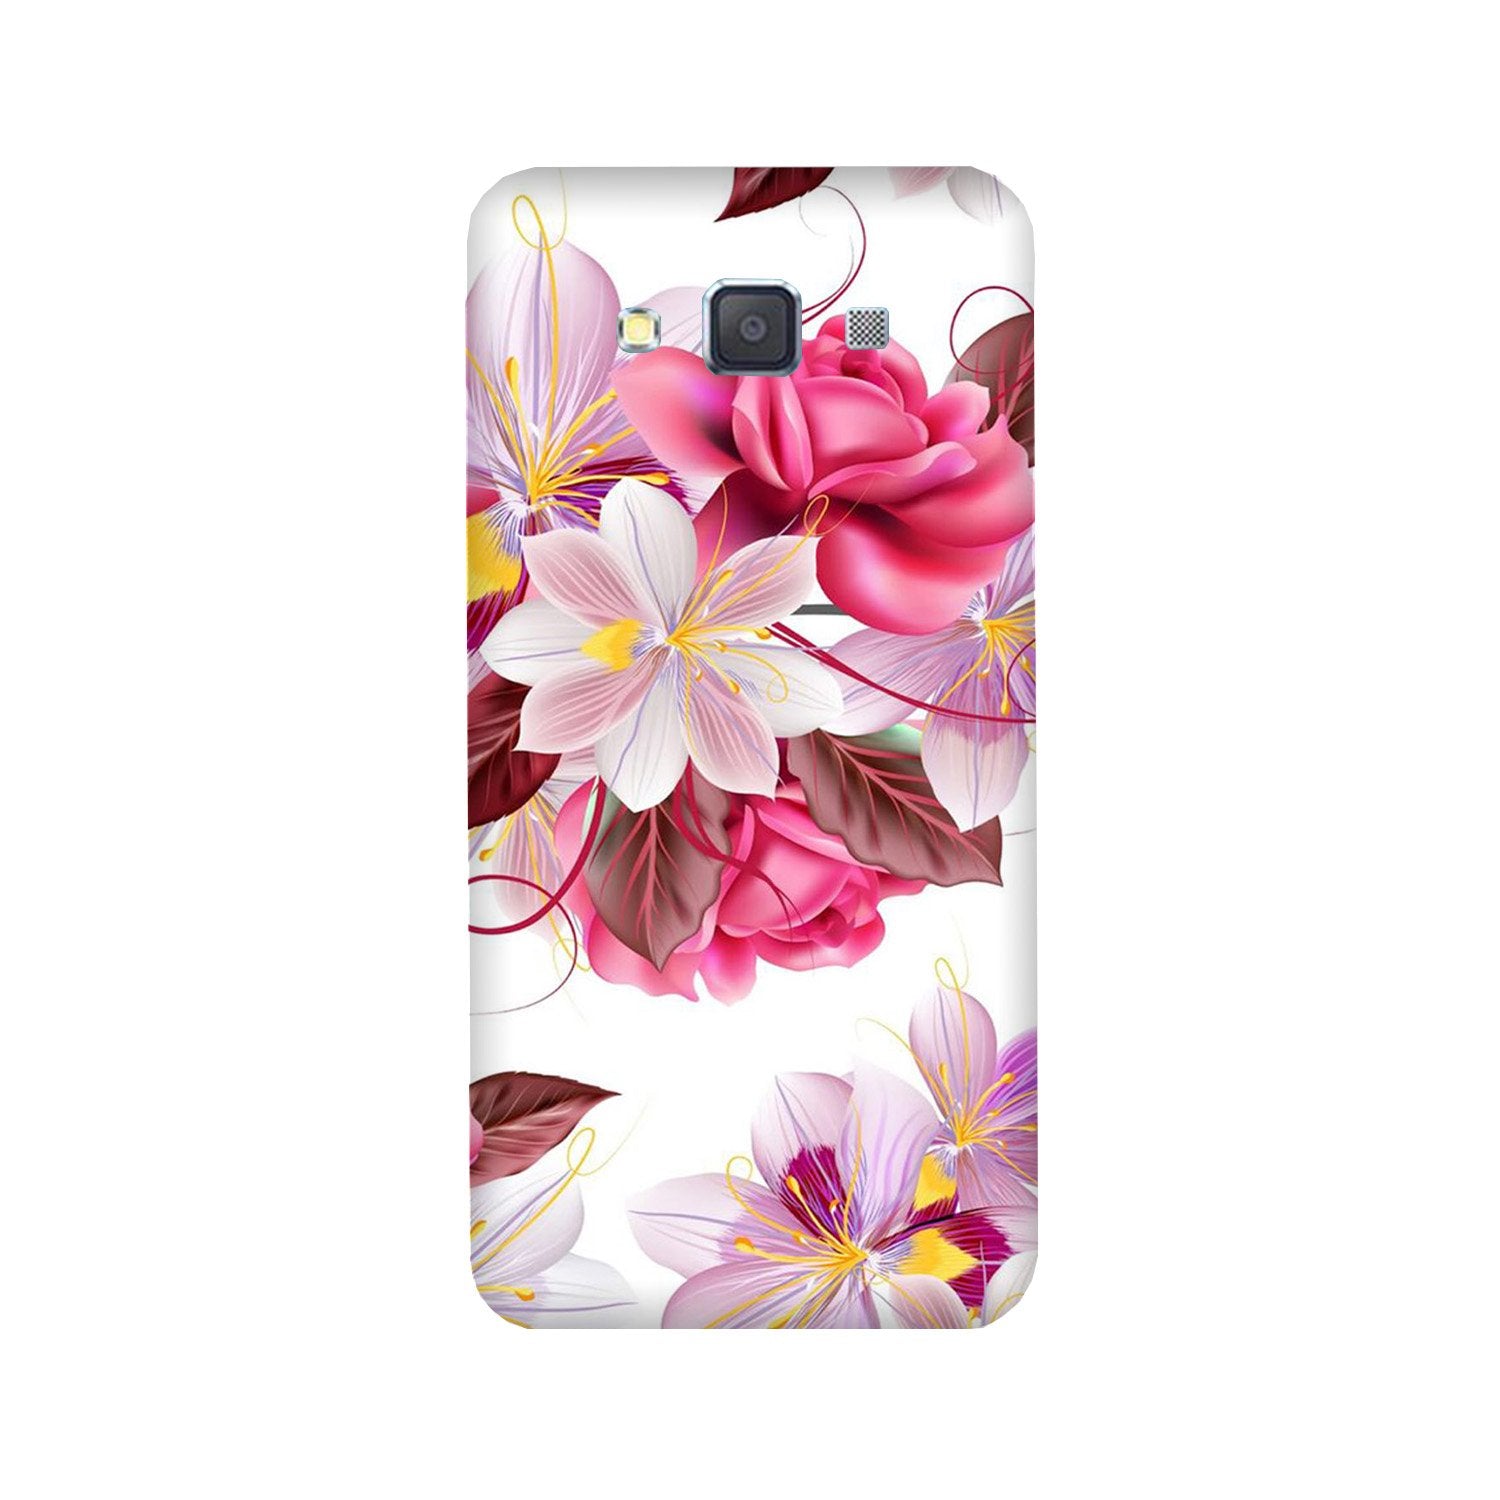 Beautiful flowers Case for Galaxy J7 (2016)